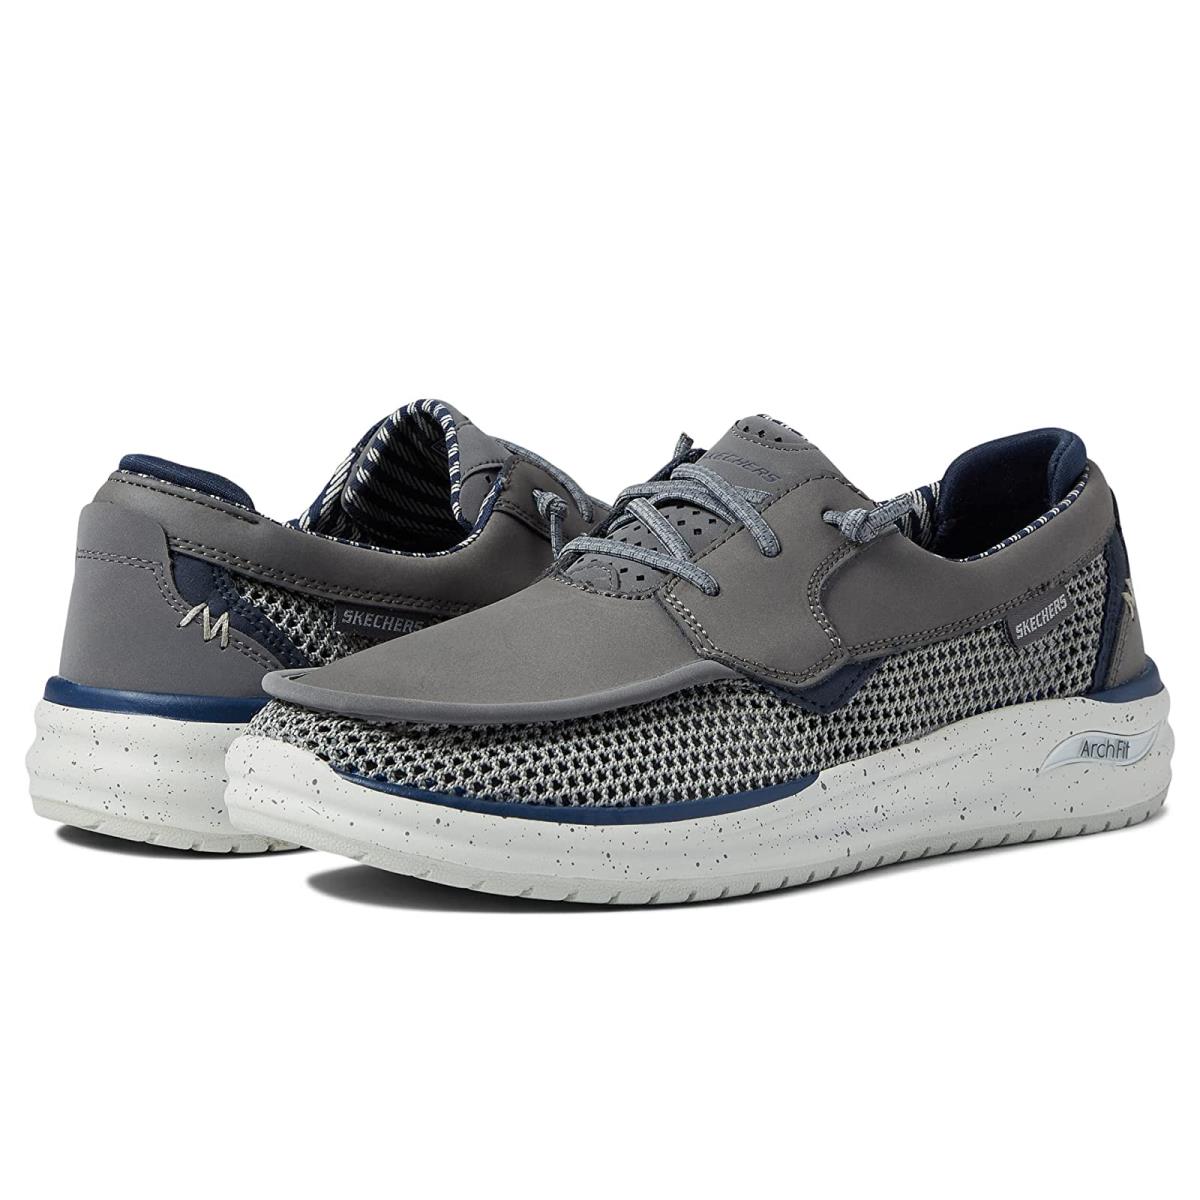 Man`s Sneakers Athletic Shoes Skechers Arch Fit Melo - Waymer Charcoal